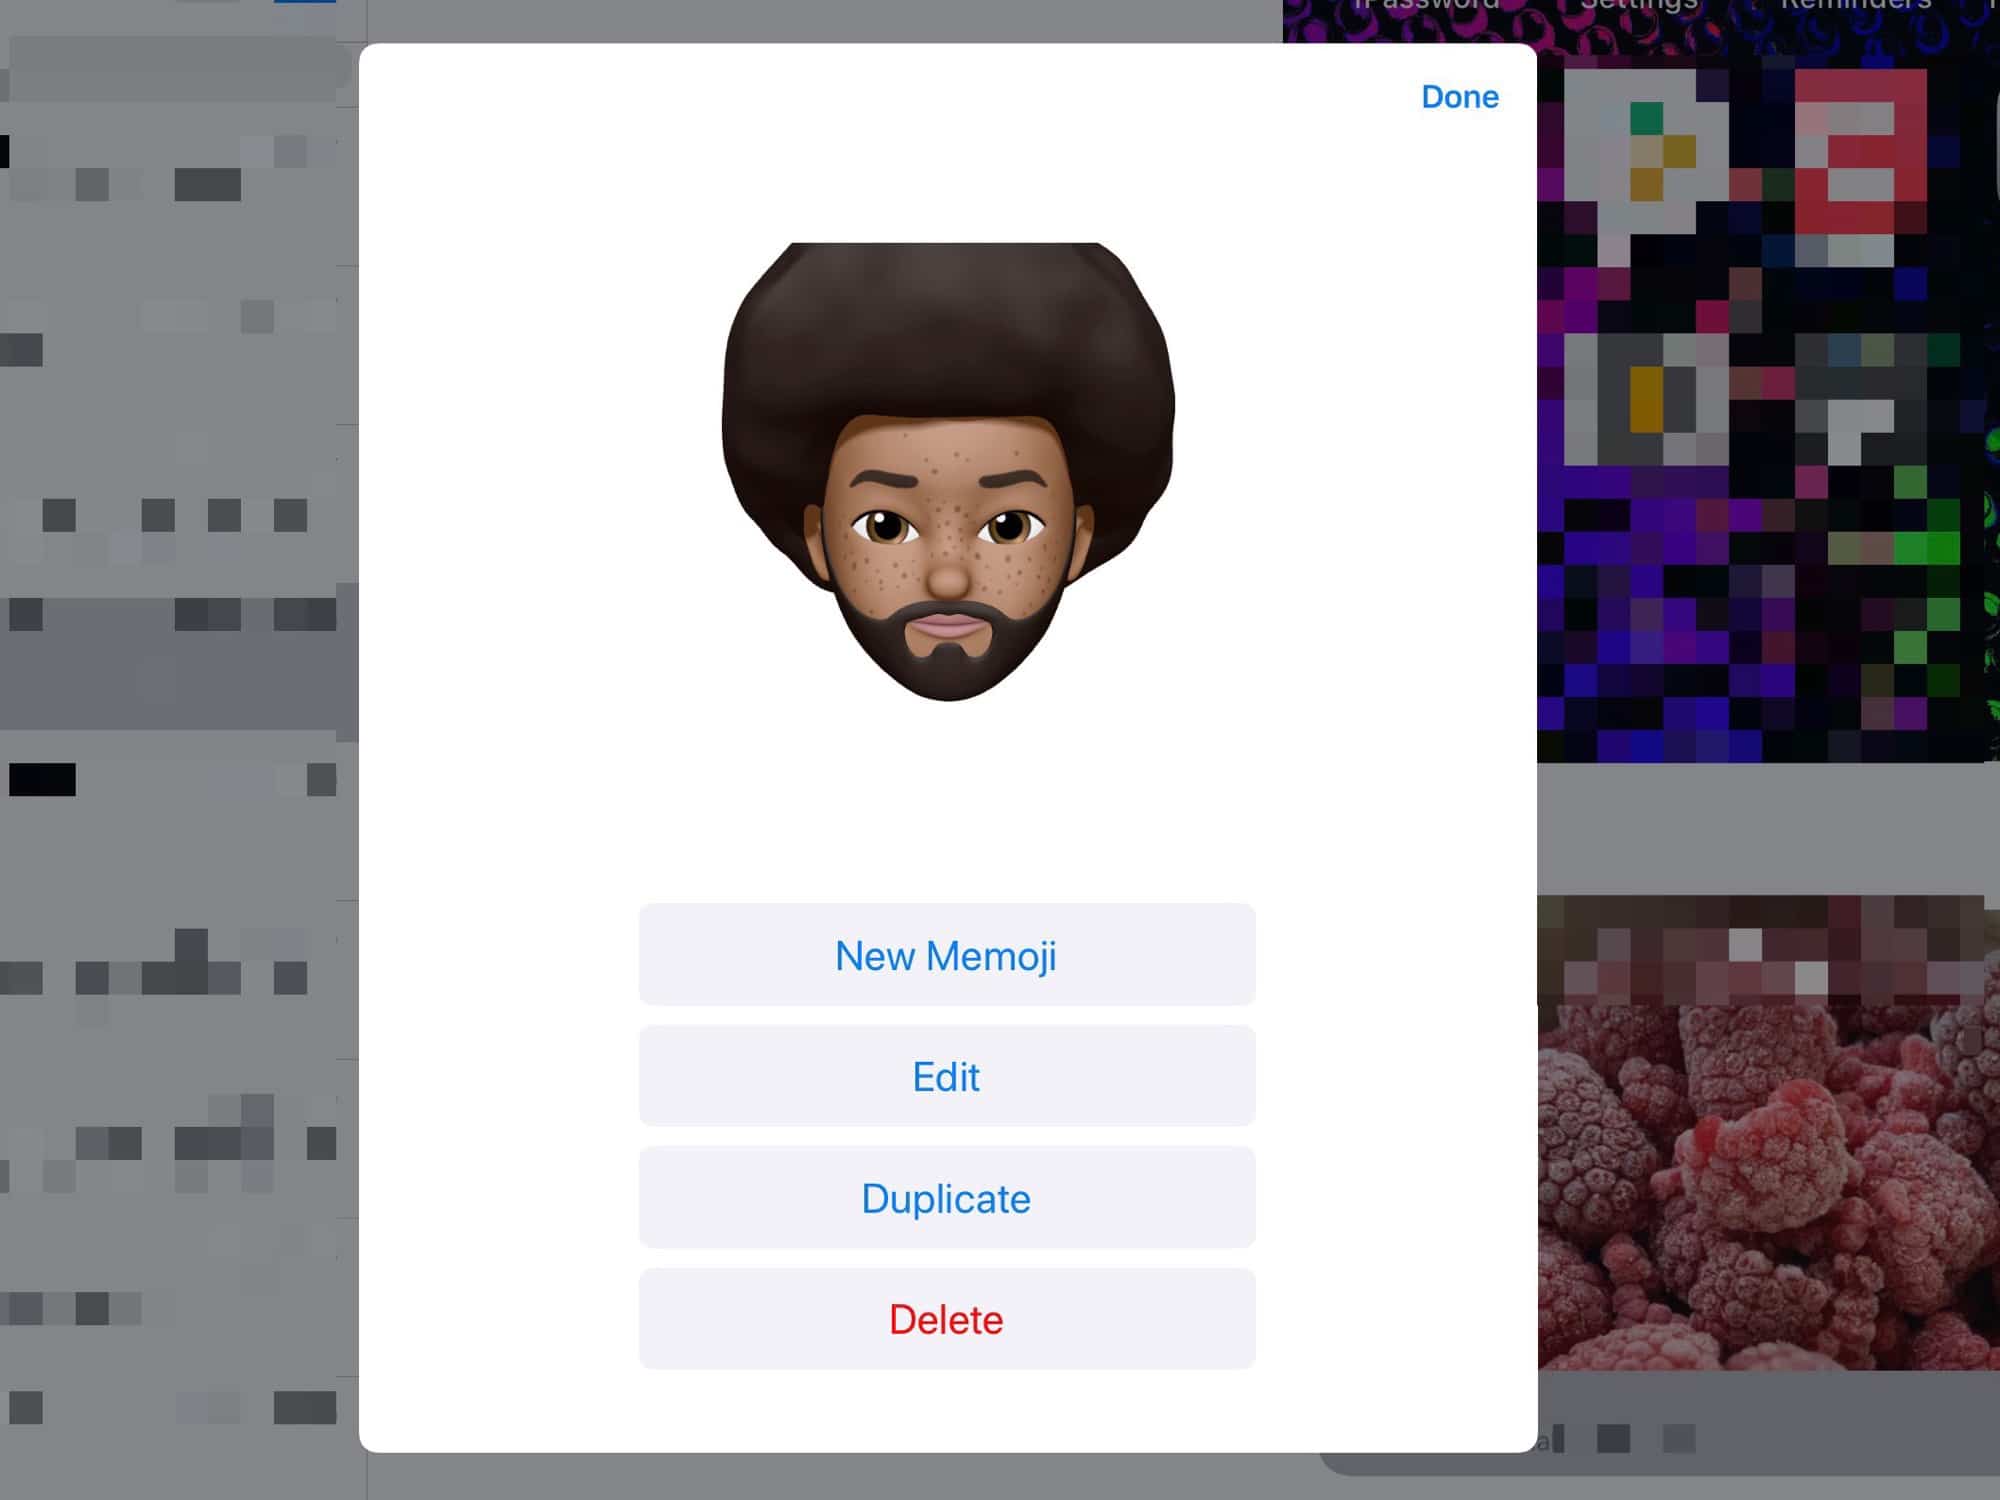 Now you can edit and create Memoji on any device.